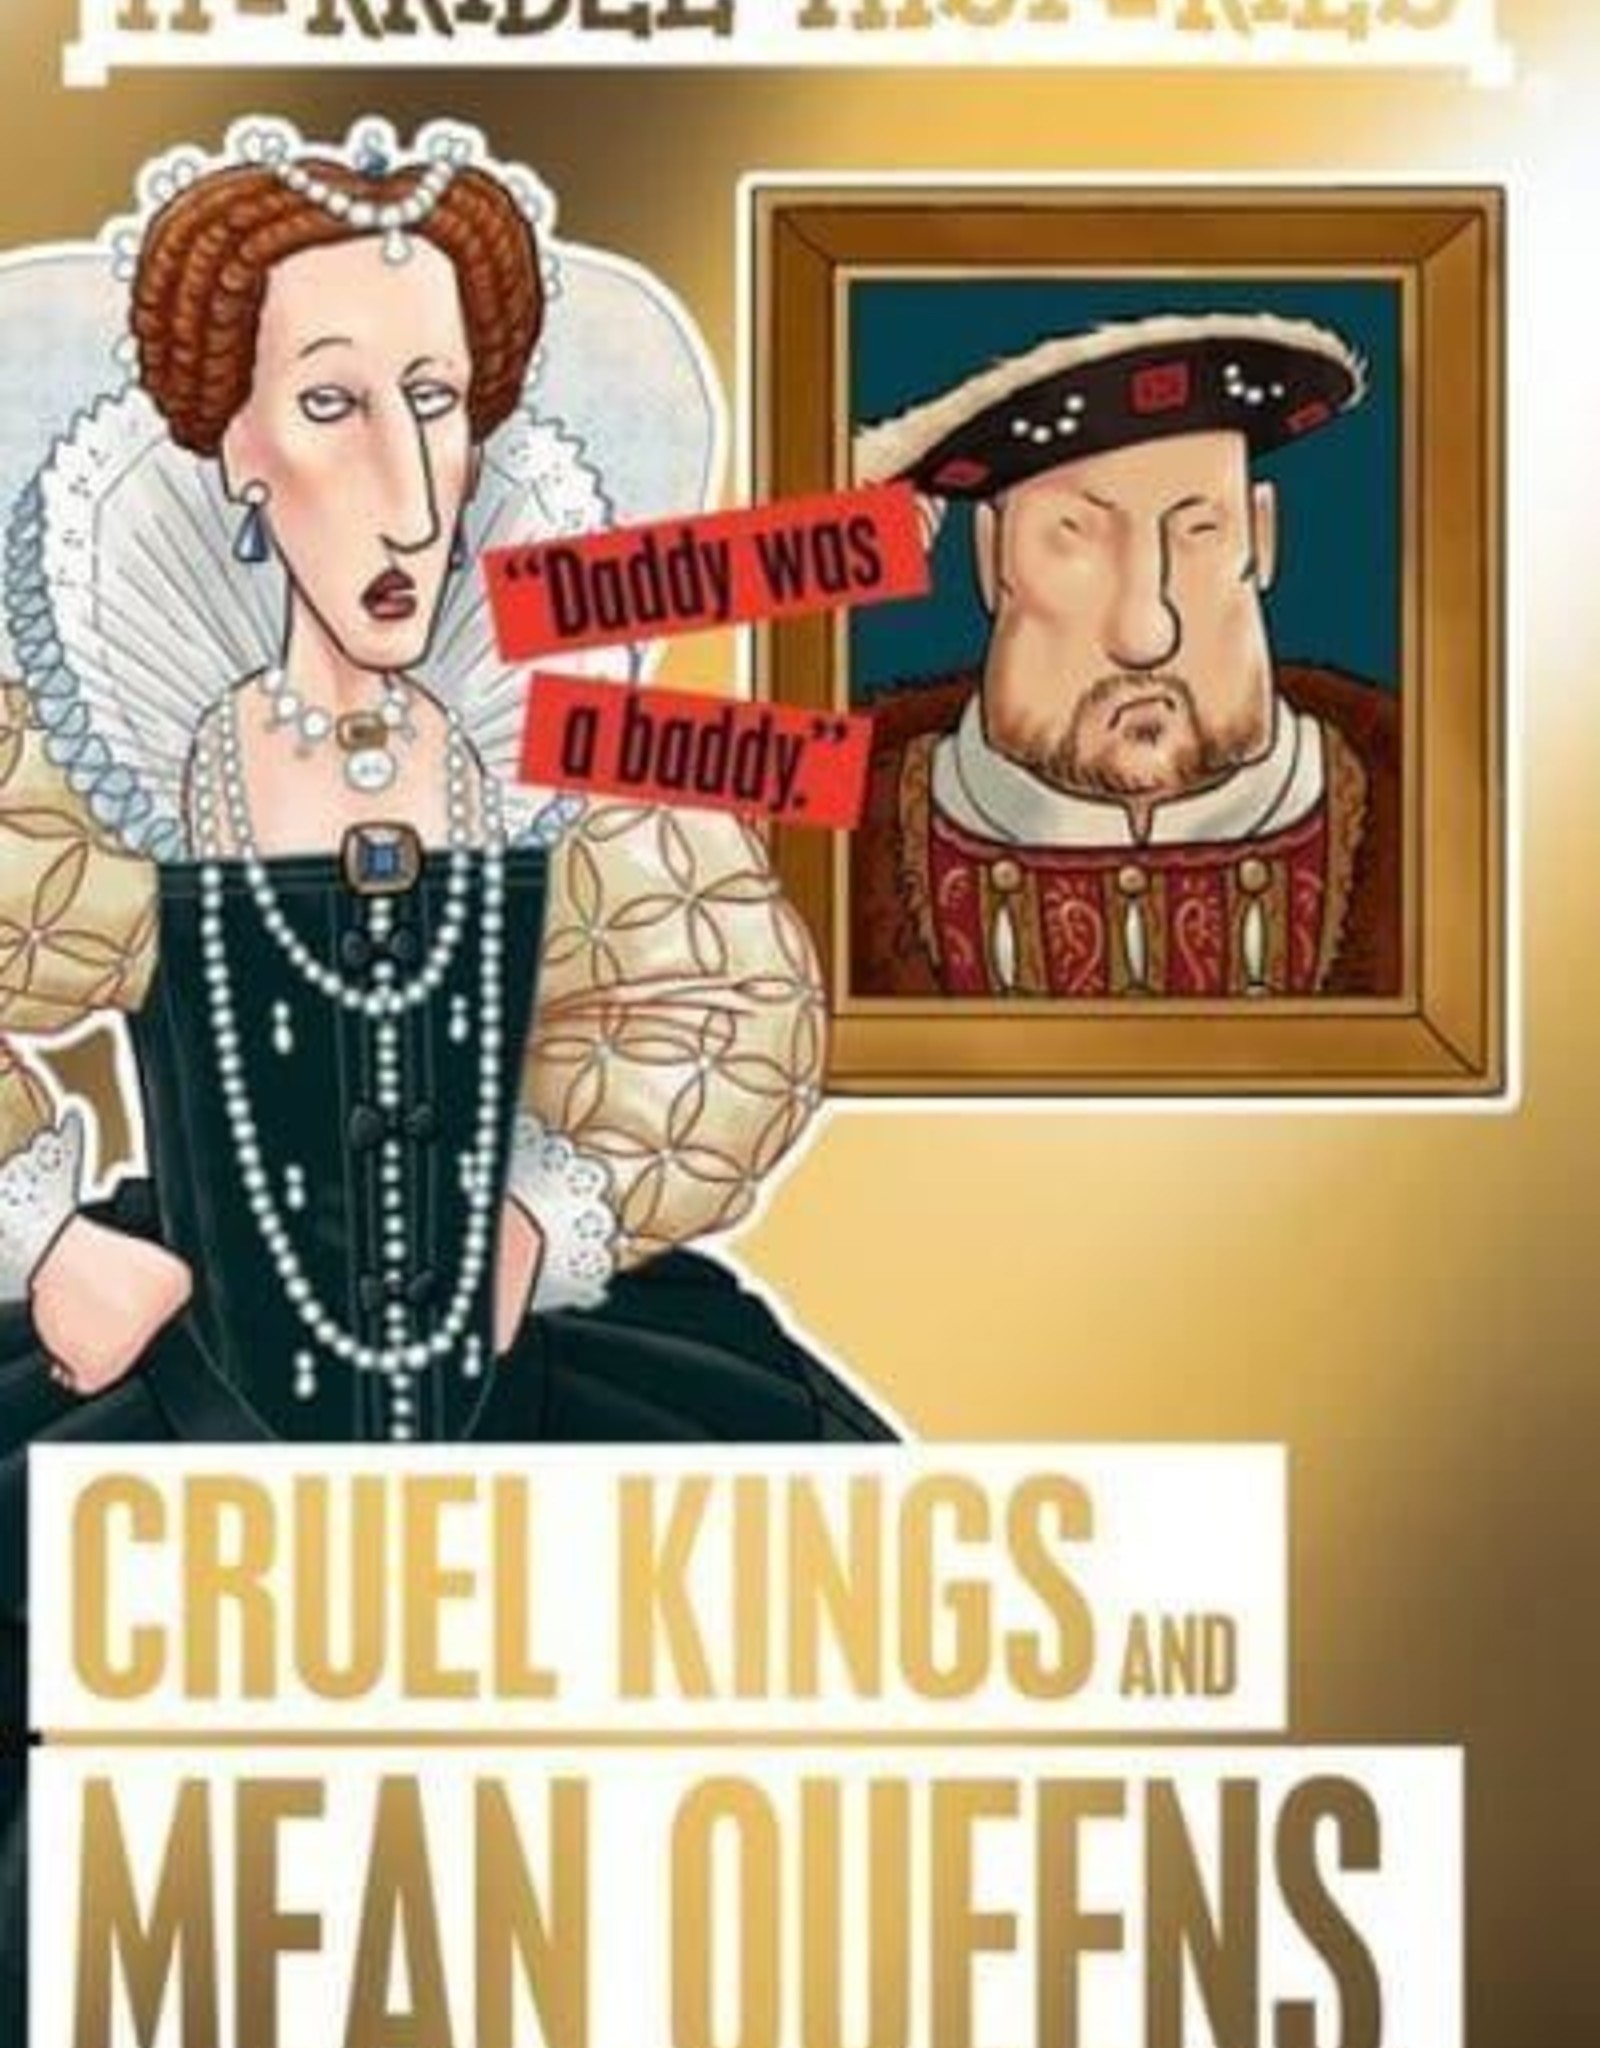 HORRIBLE HISTORIES: CRUEL KINGS AND MEAN QUEENS (NEW)